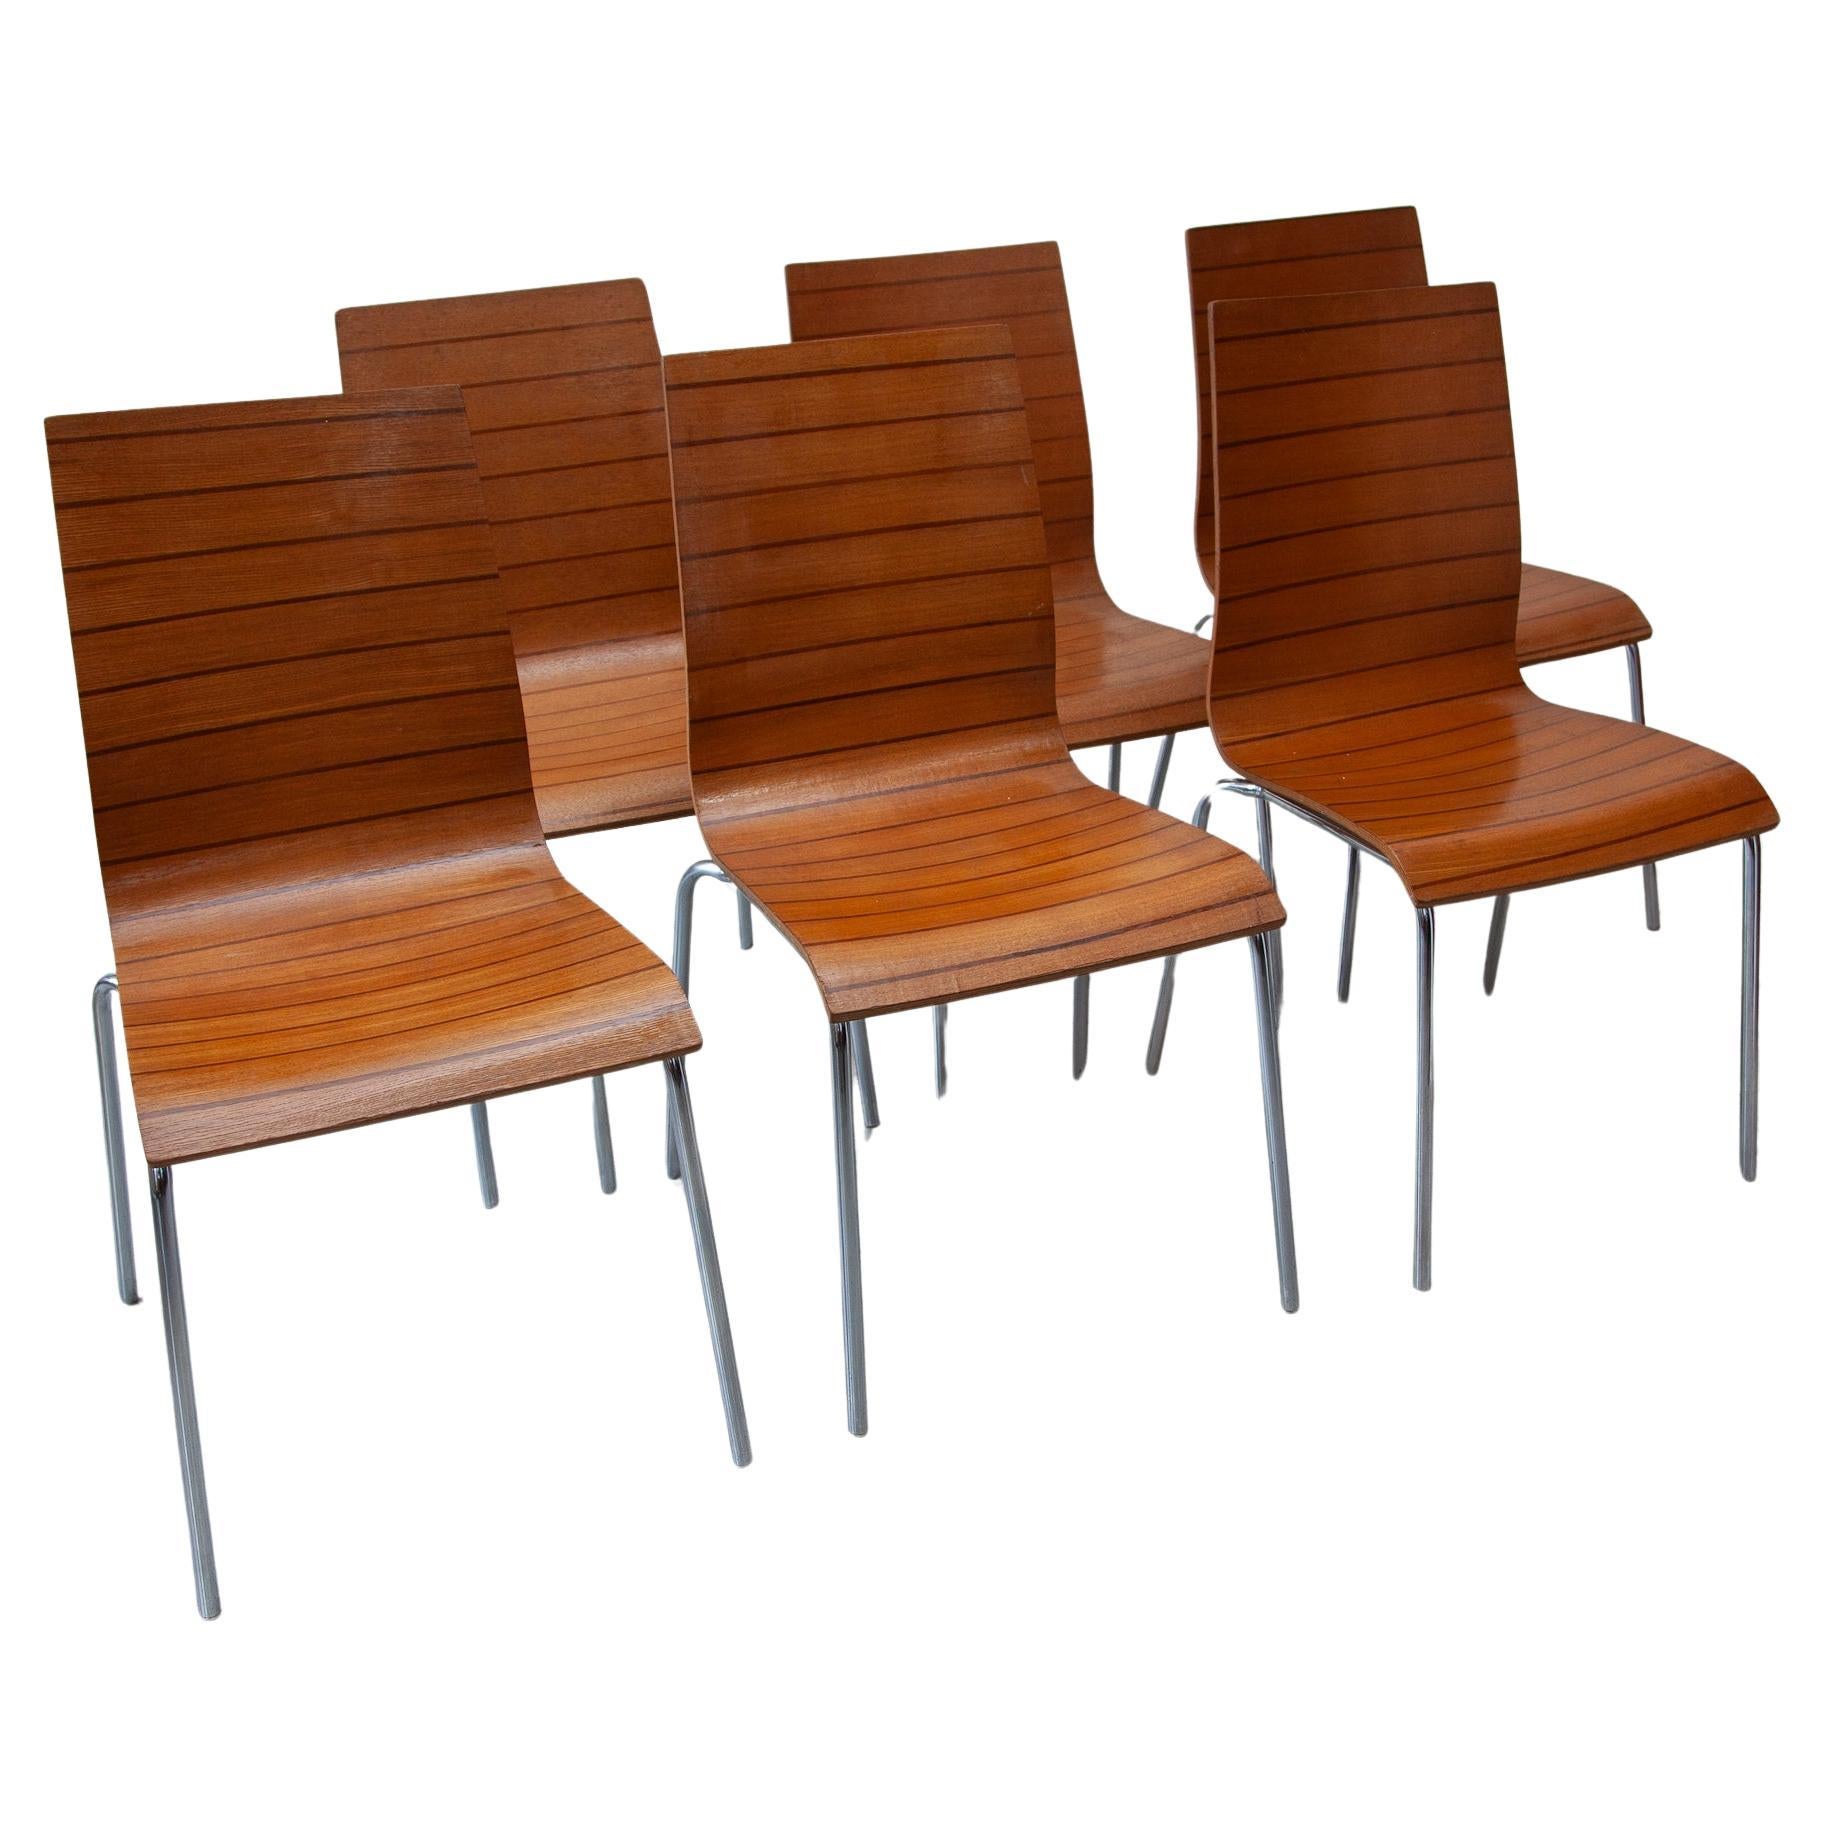 Set of Six High Back Stacking Plywood Chairs, 1980s For Sale